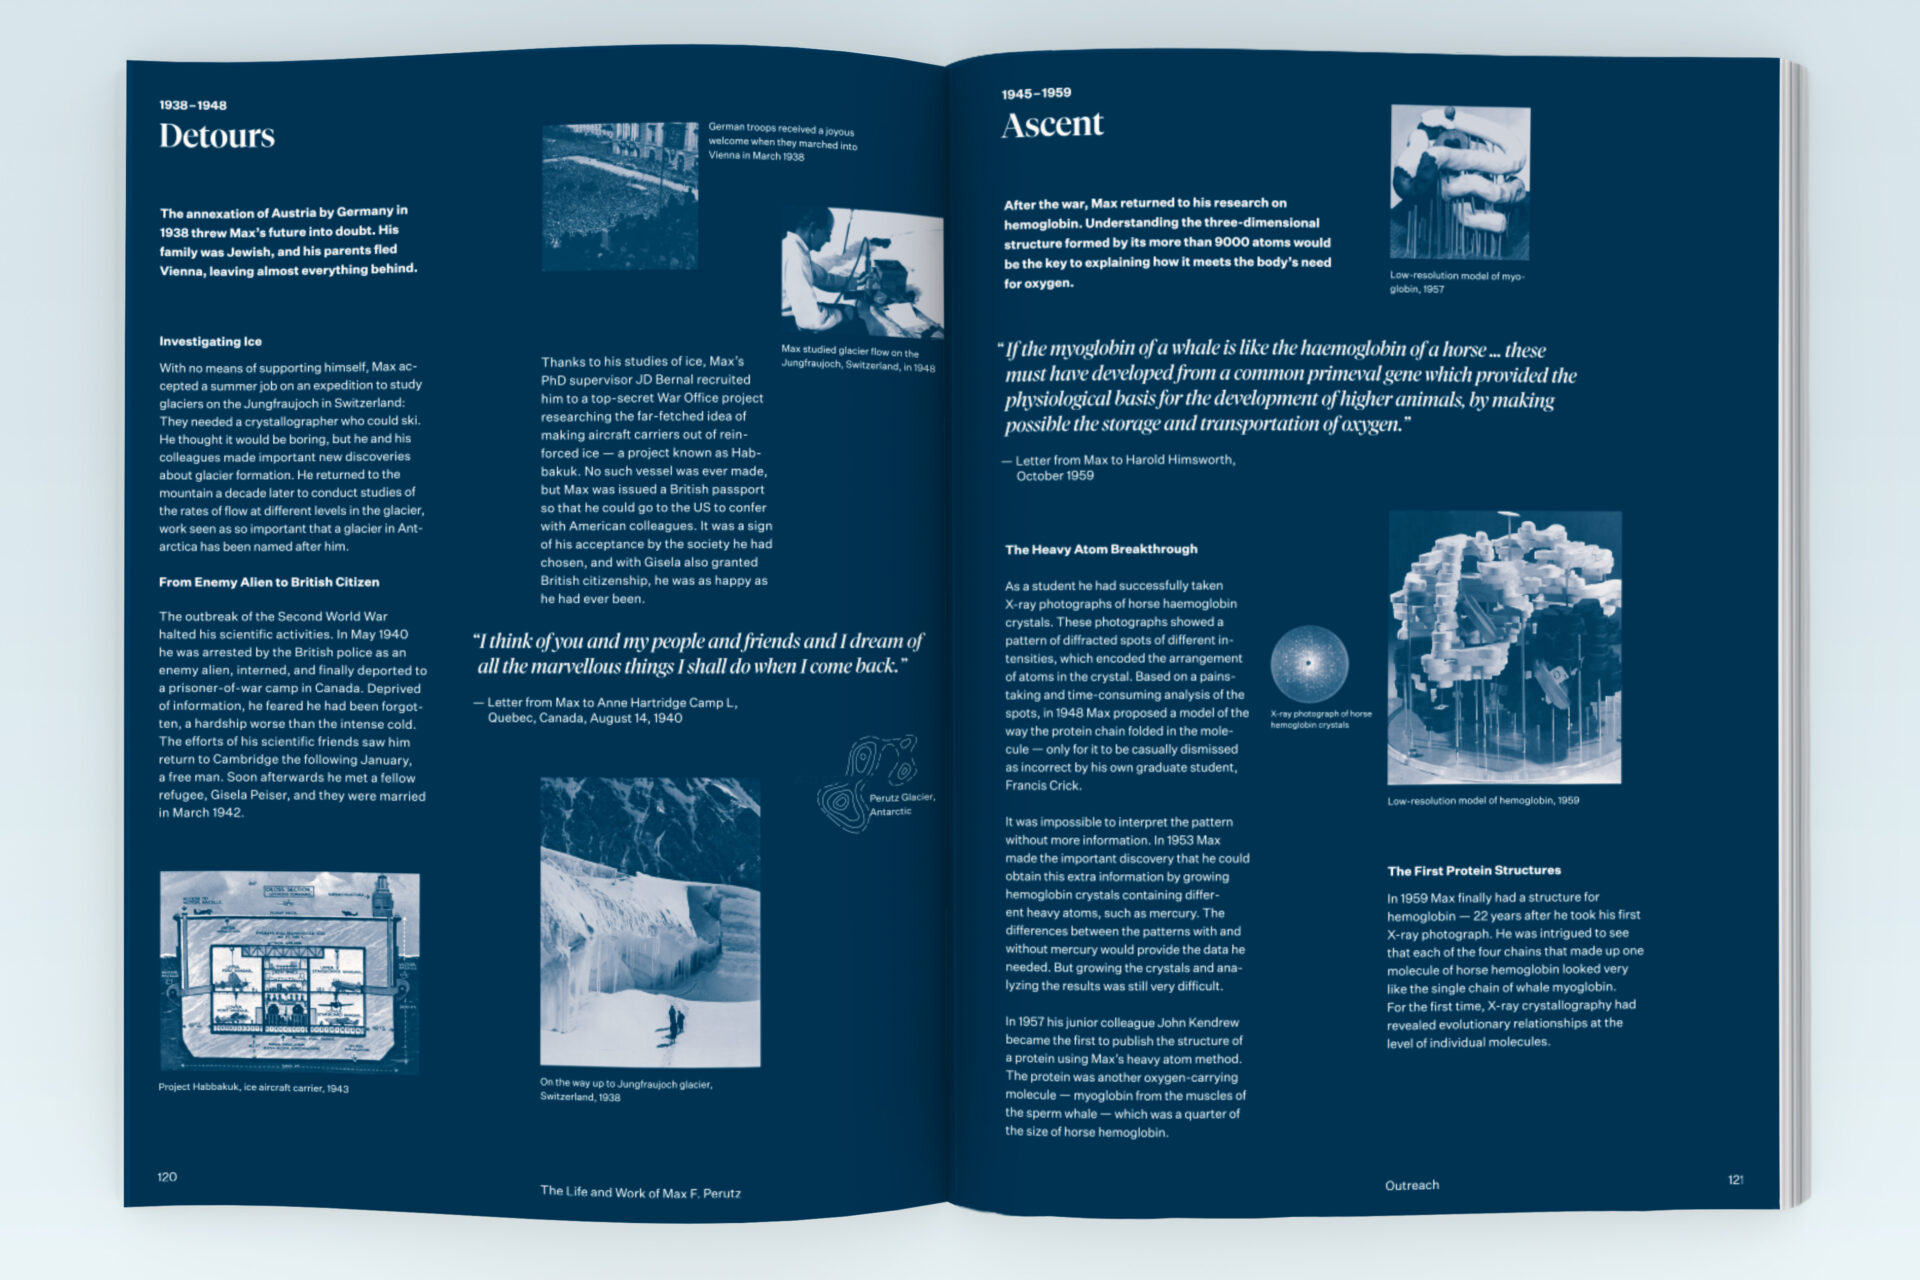 Double-page spread on the life of Max Perutz, with photos and text in white on a blue background